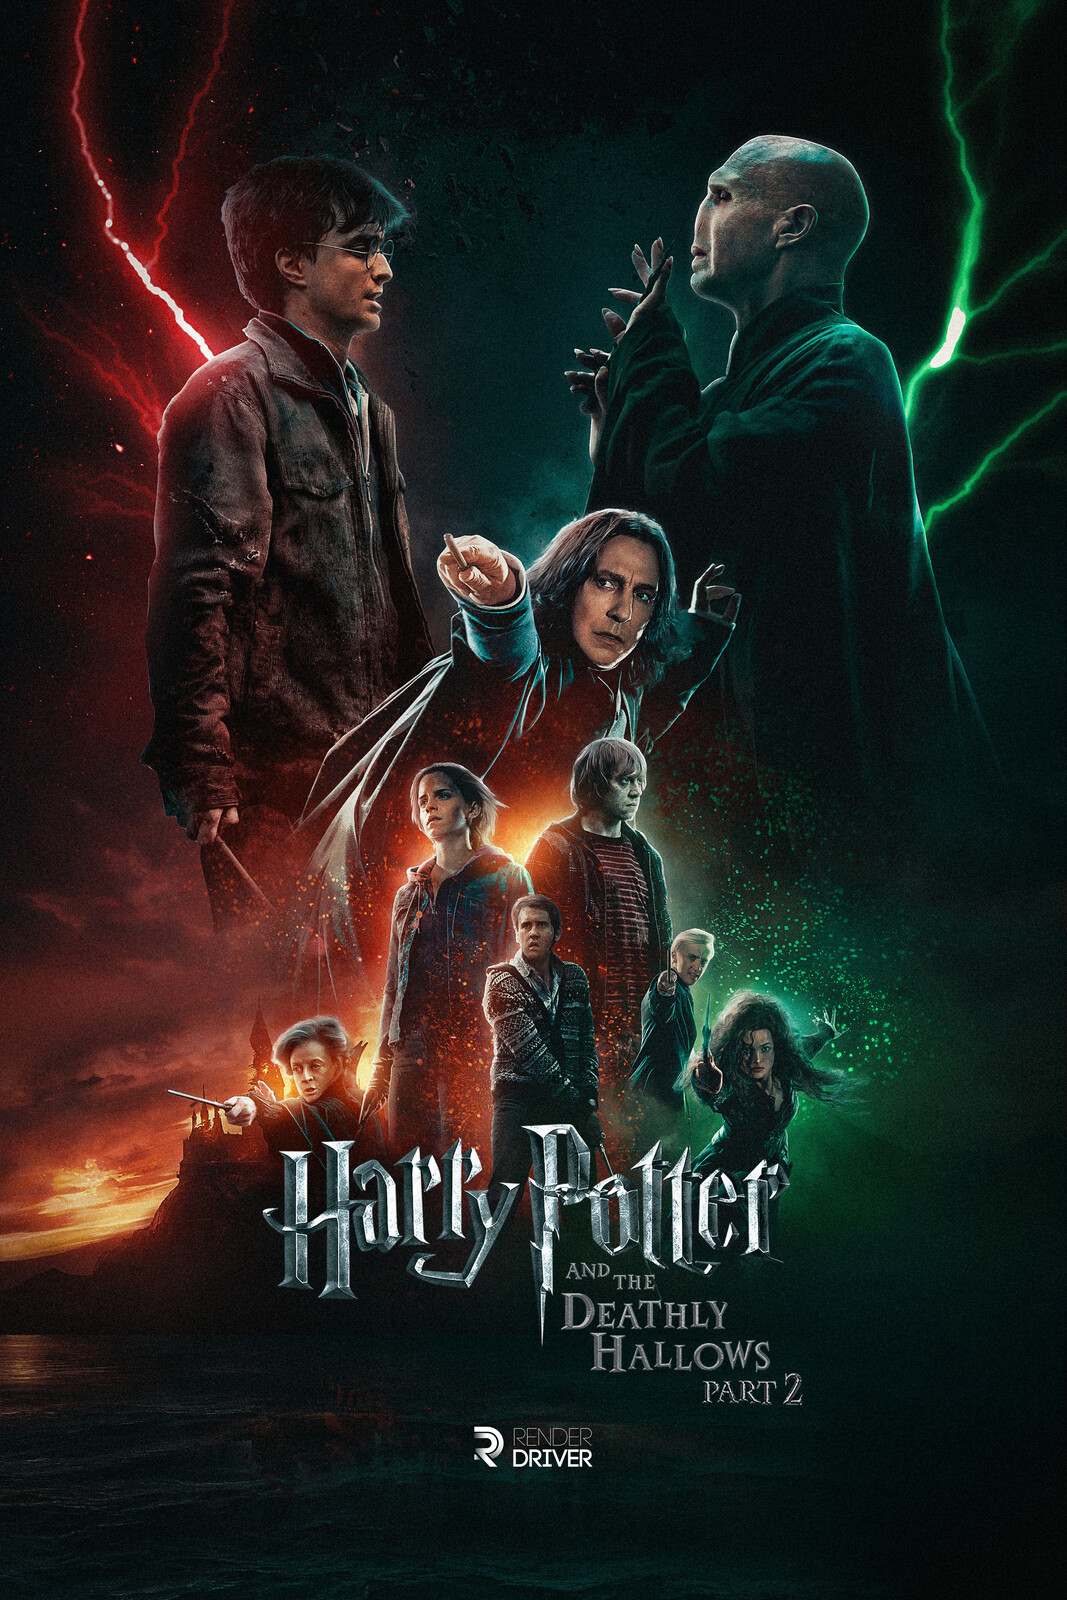 Render Driver - Harry Potter and the Deathly Hallows Part 2 Poster